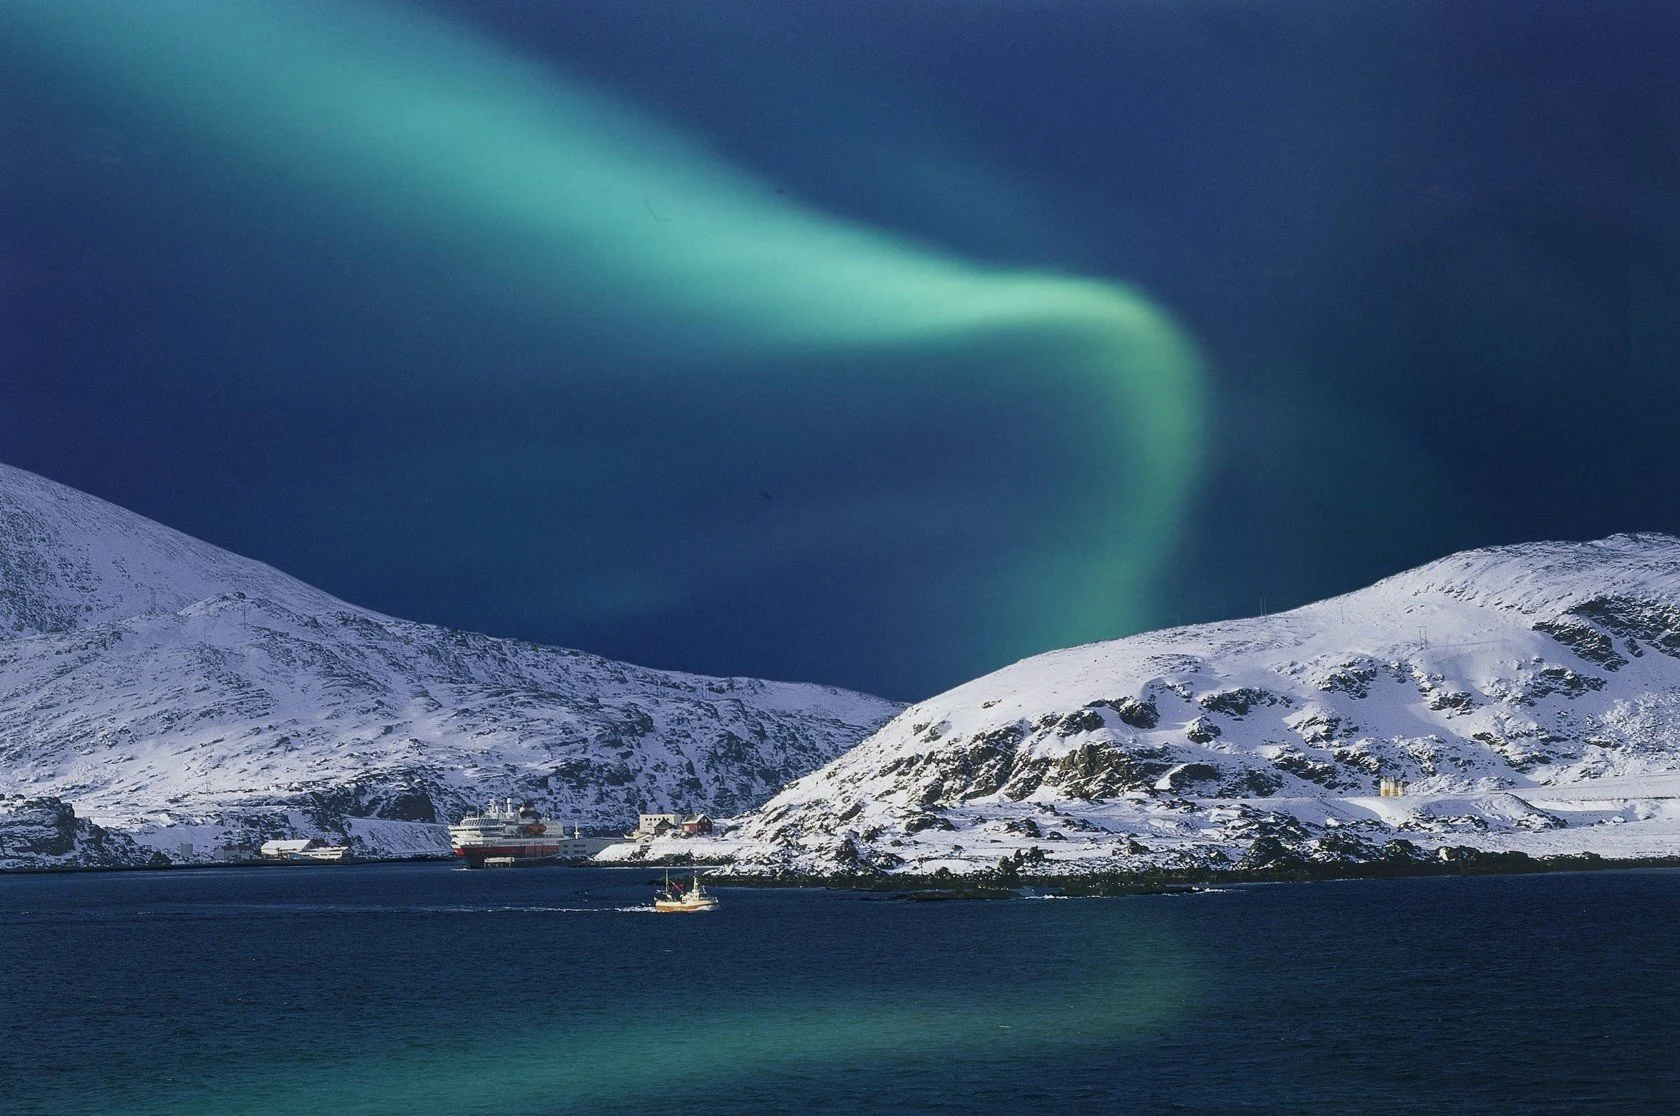 Unearthly, surreal color lights above the mountains in Northern Norway